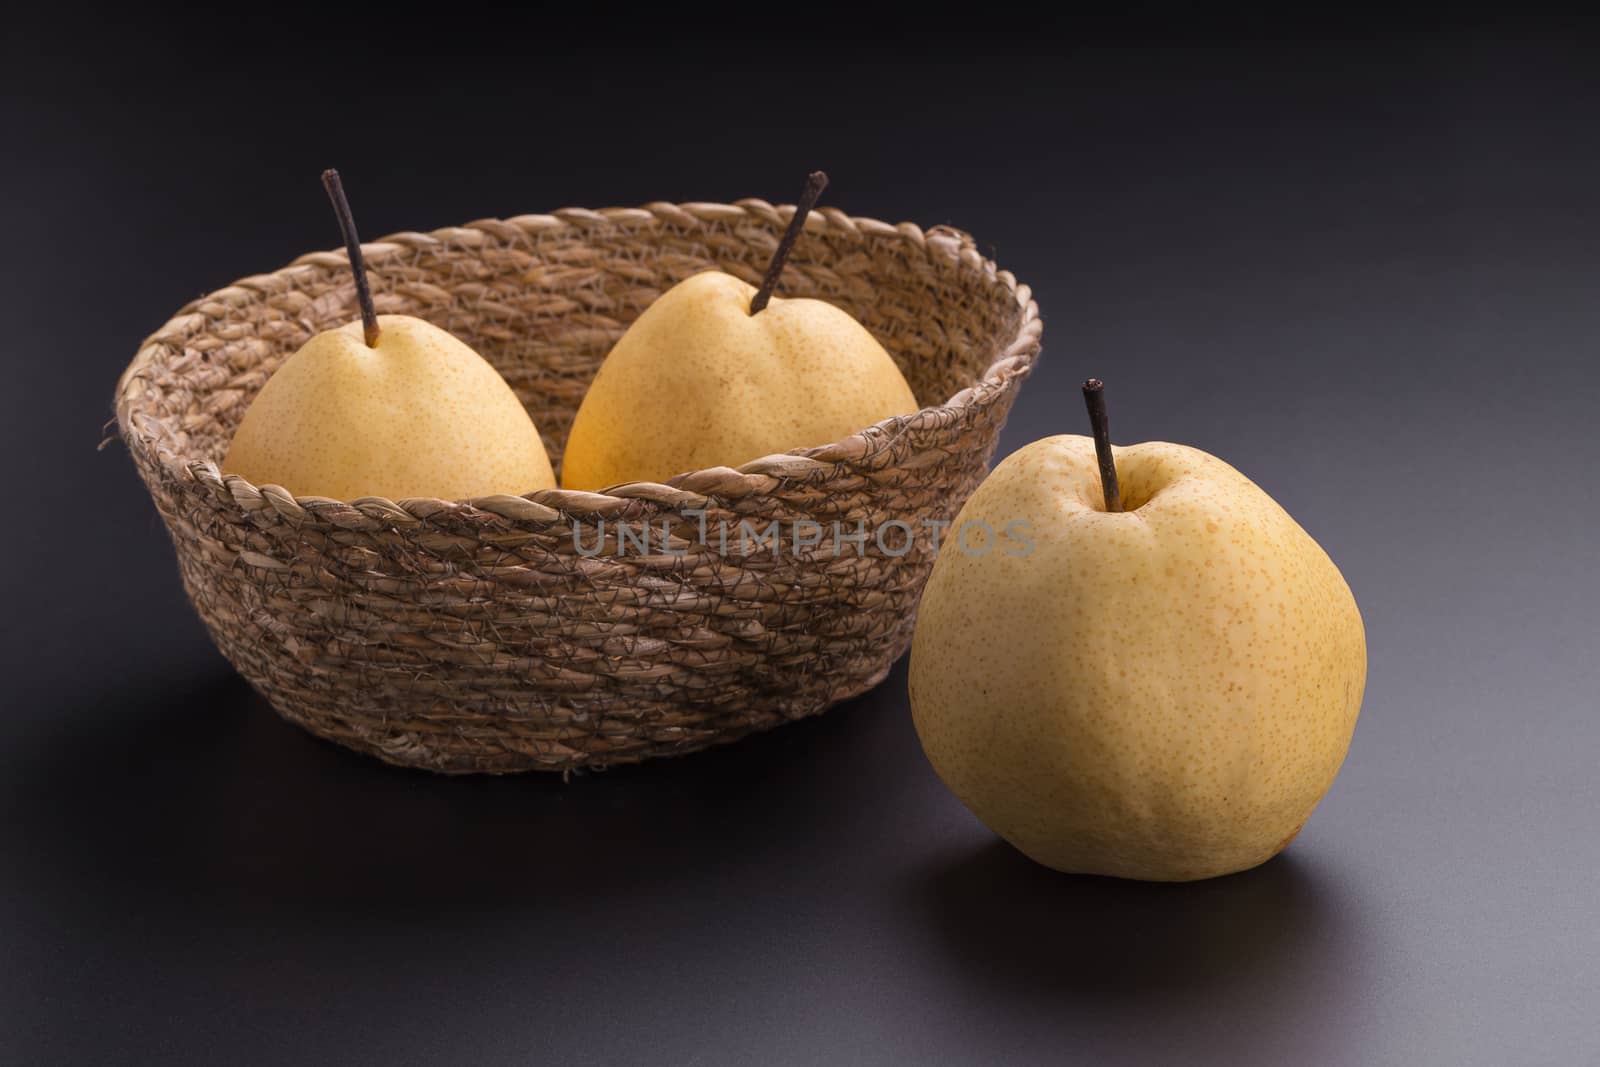 Chinese pear fruits on black background by kaiskynet